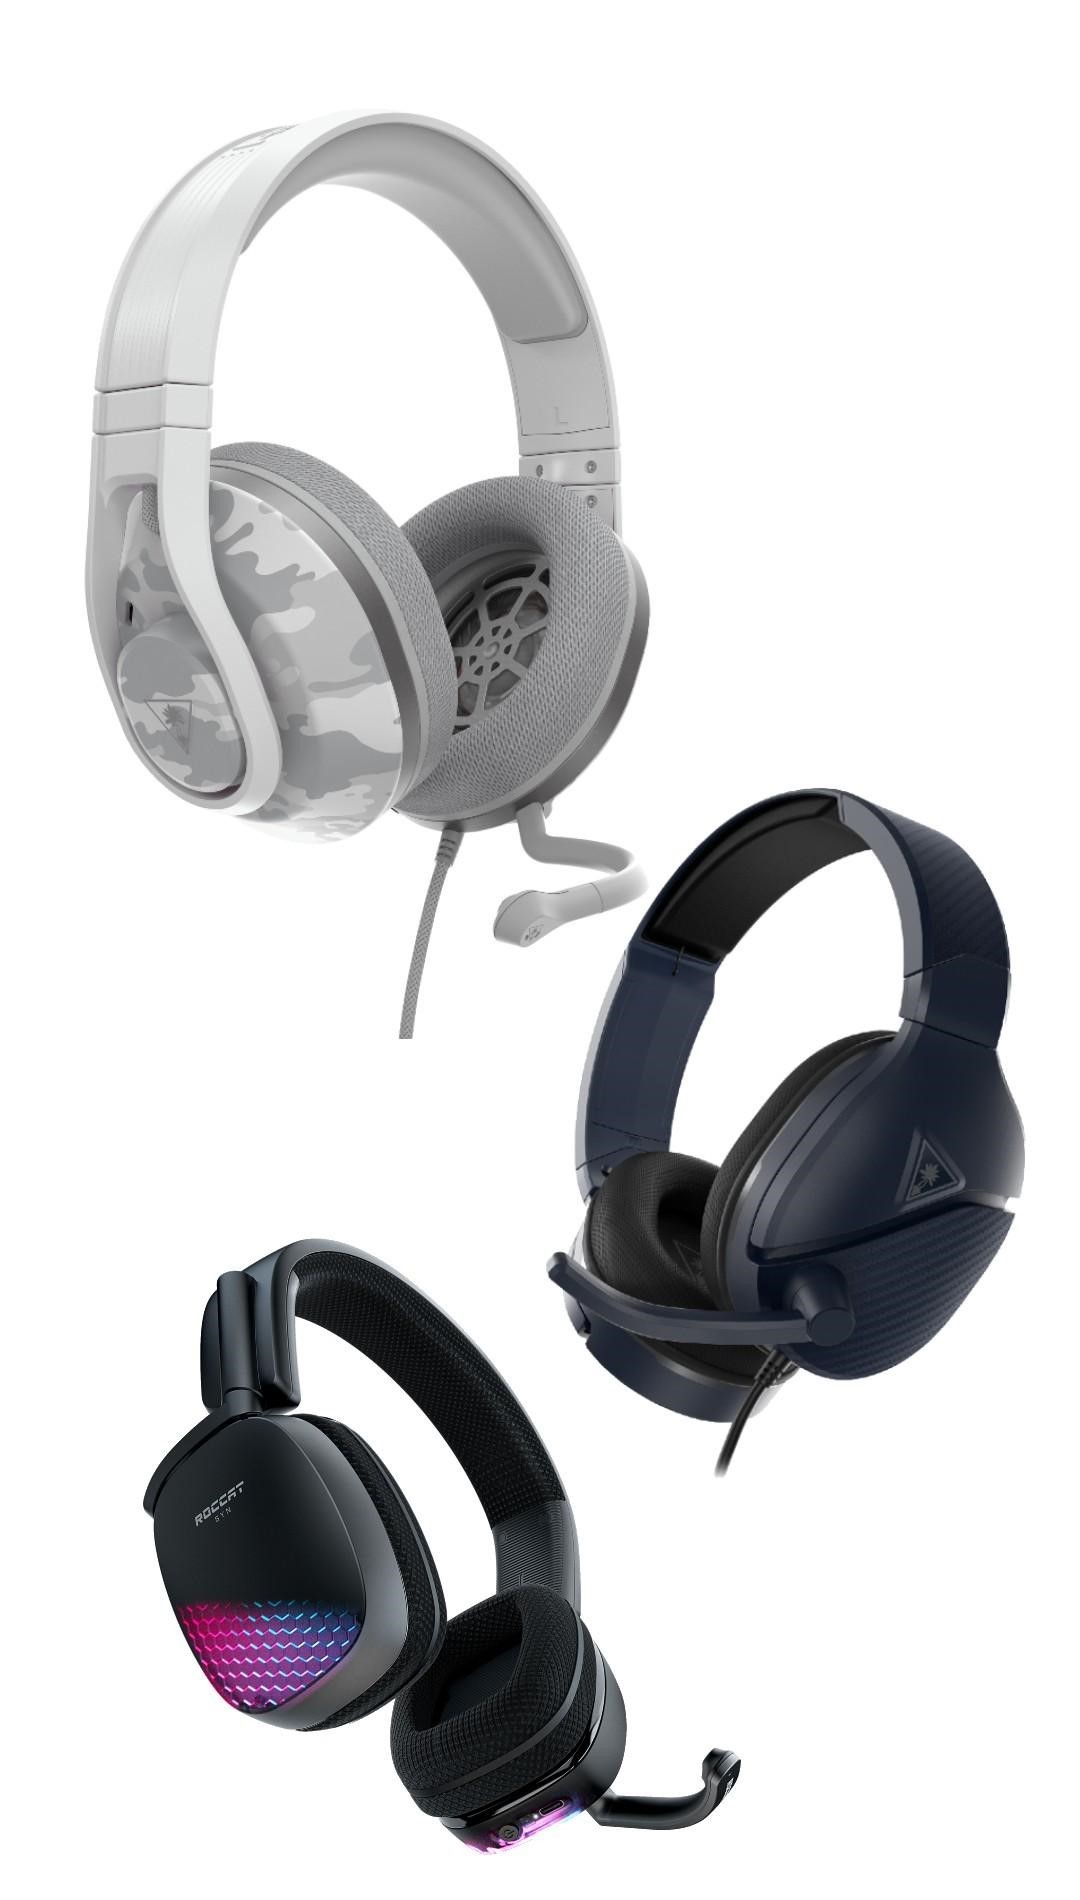 Okklusion Maleri Footpad Turtle Beach, ROCCAT, and Neat Deliver High-quality, Award-winning Gaming  Accessories and Microphones for the Holidays | Business Wire